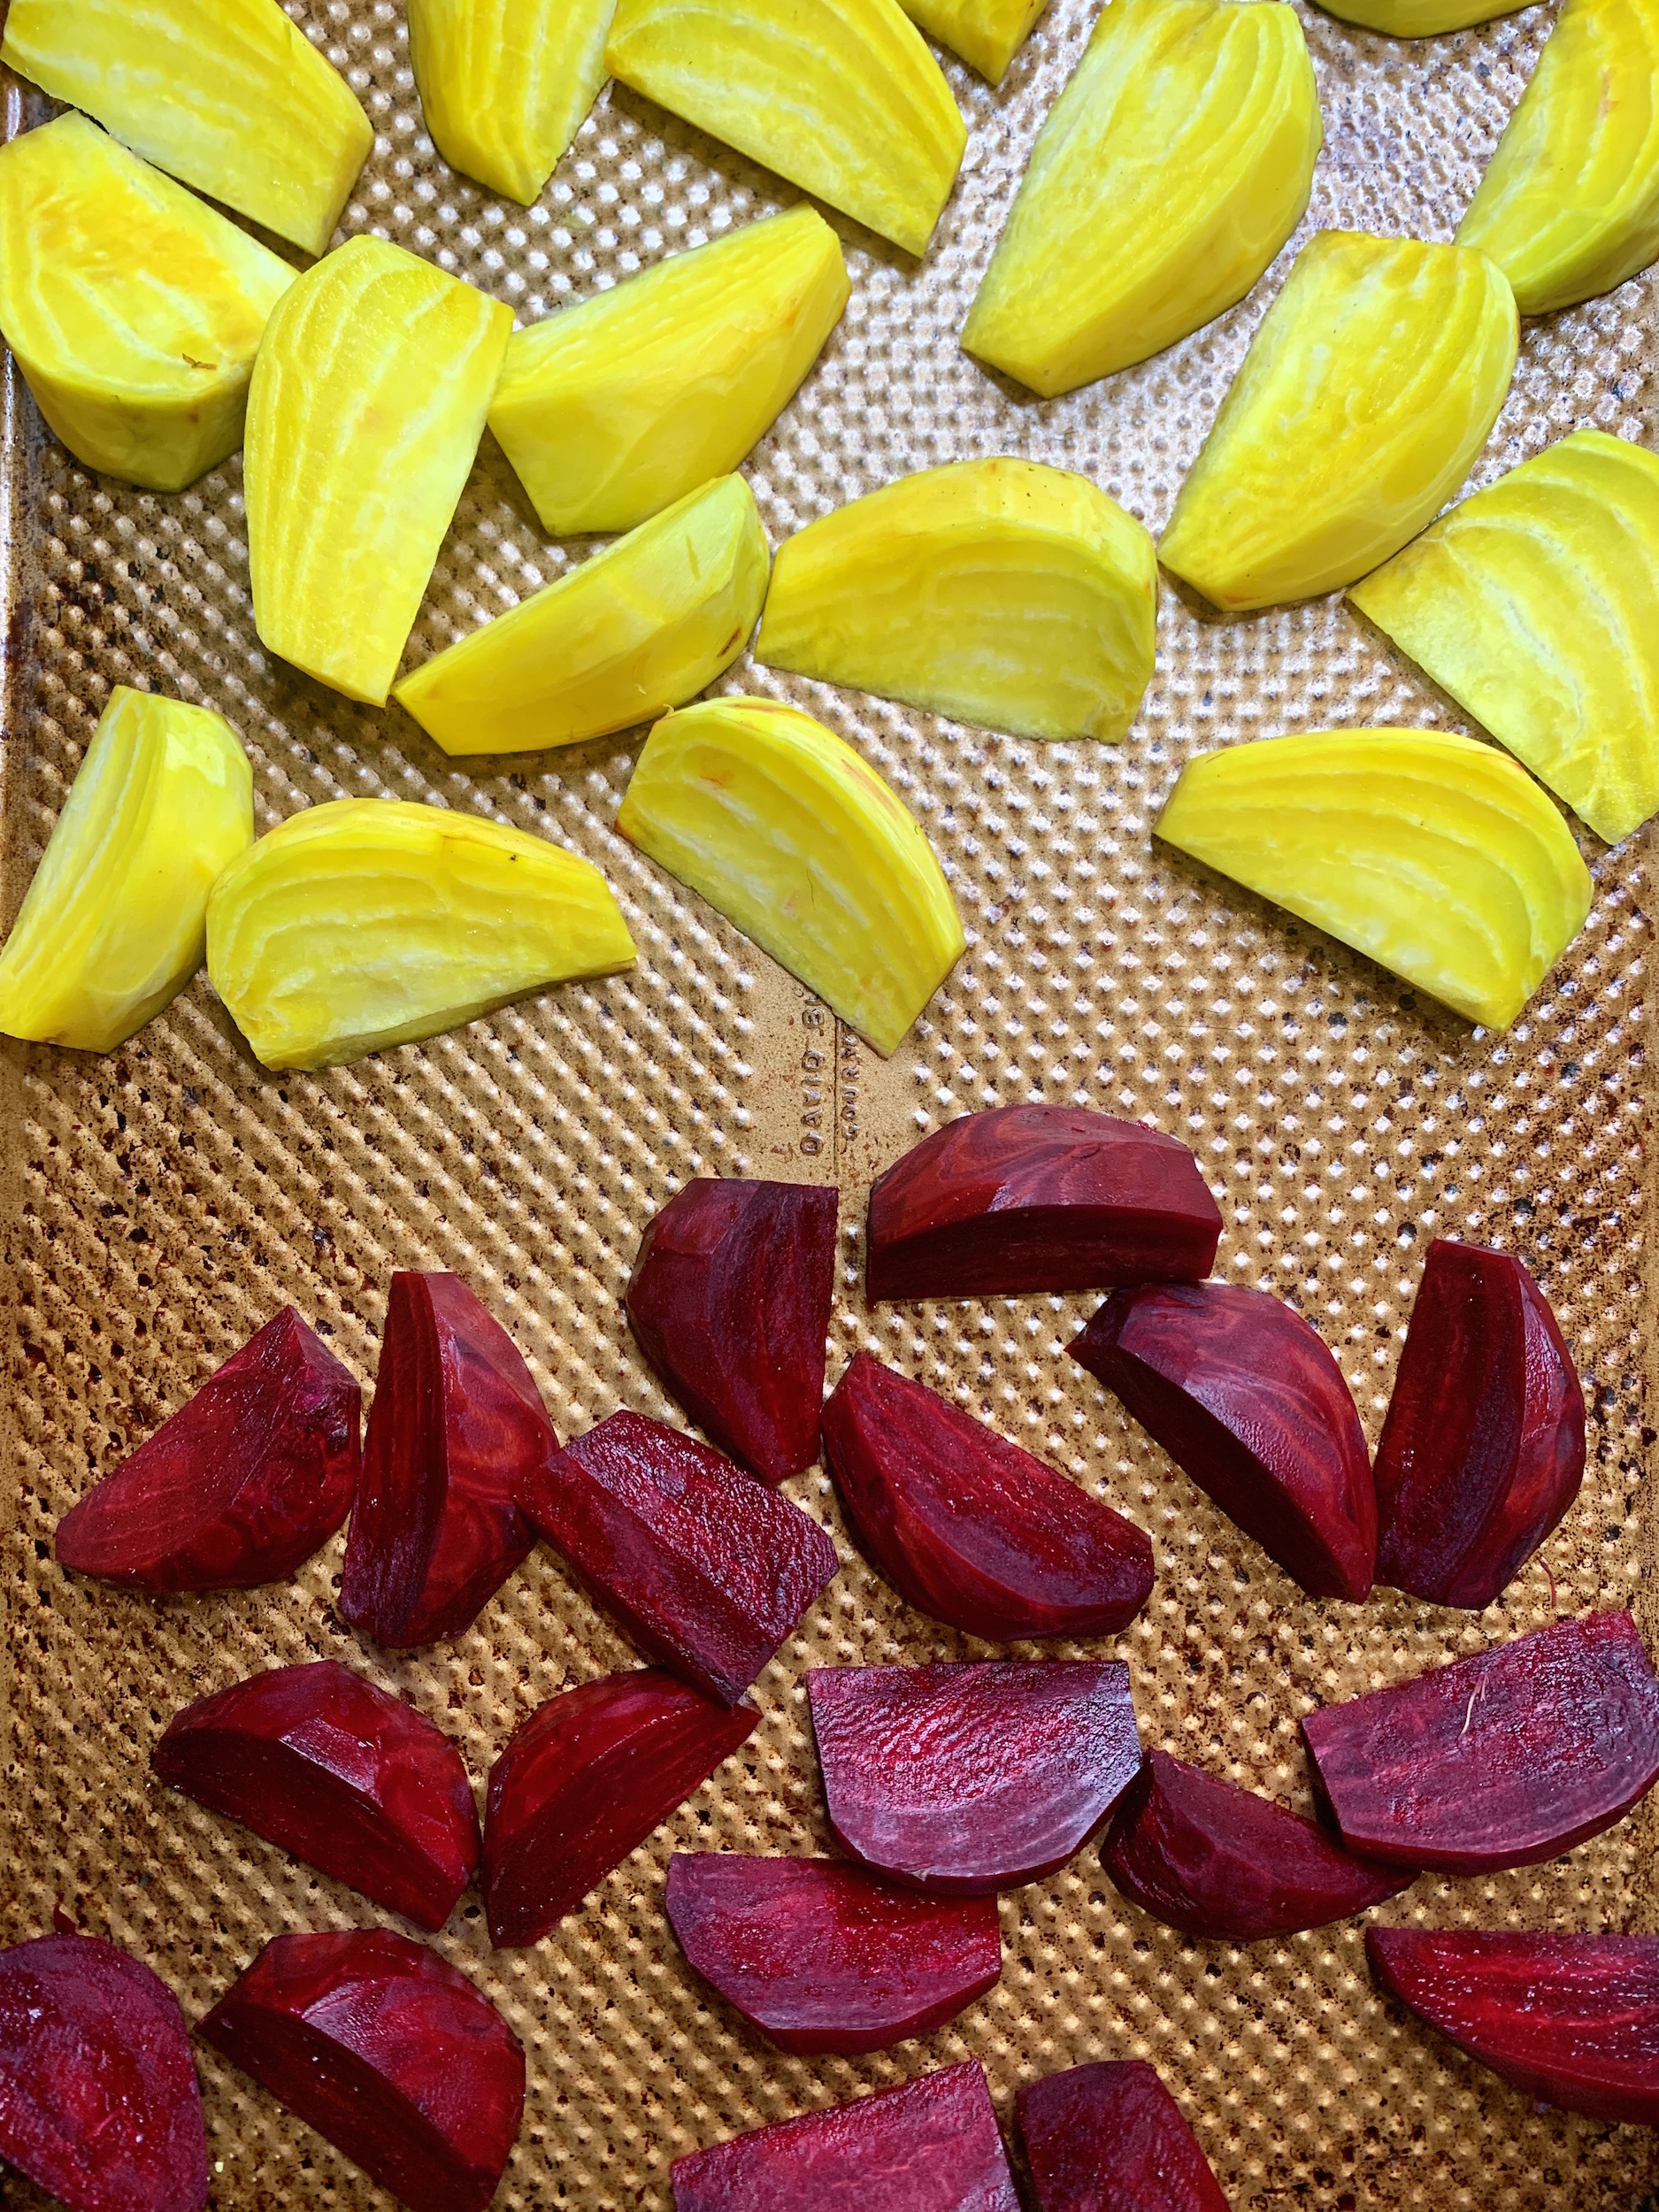 red and golden beets on a baking sheet